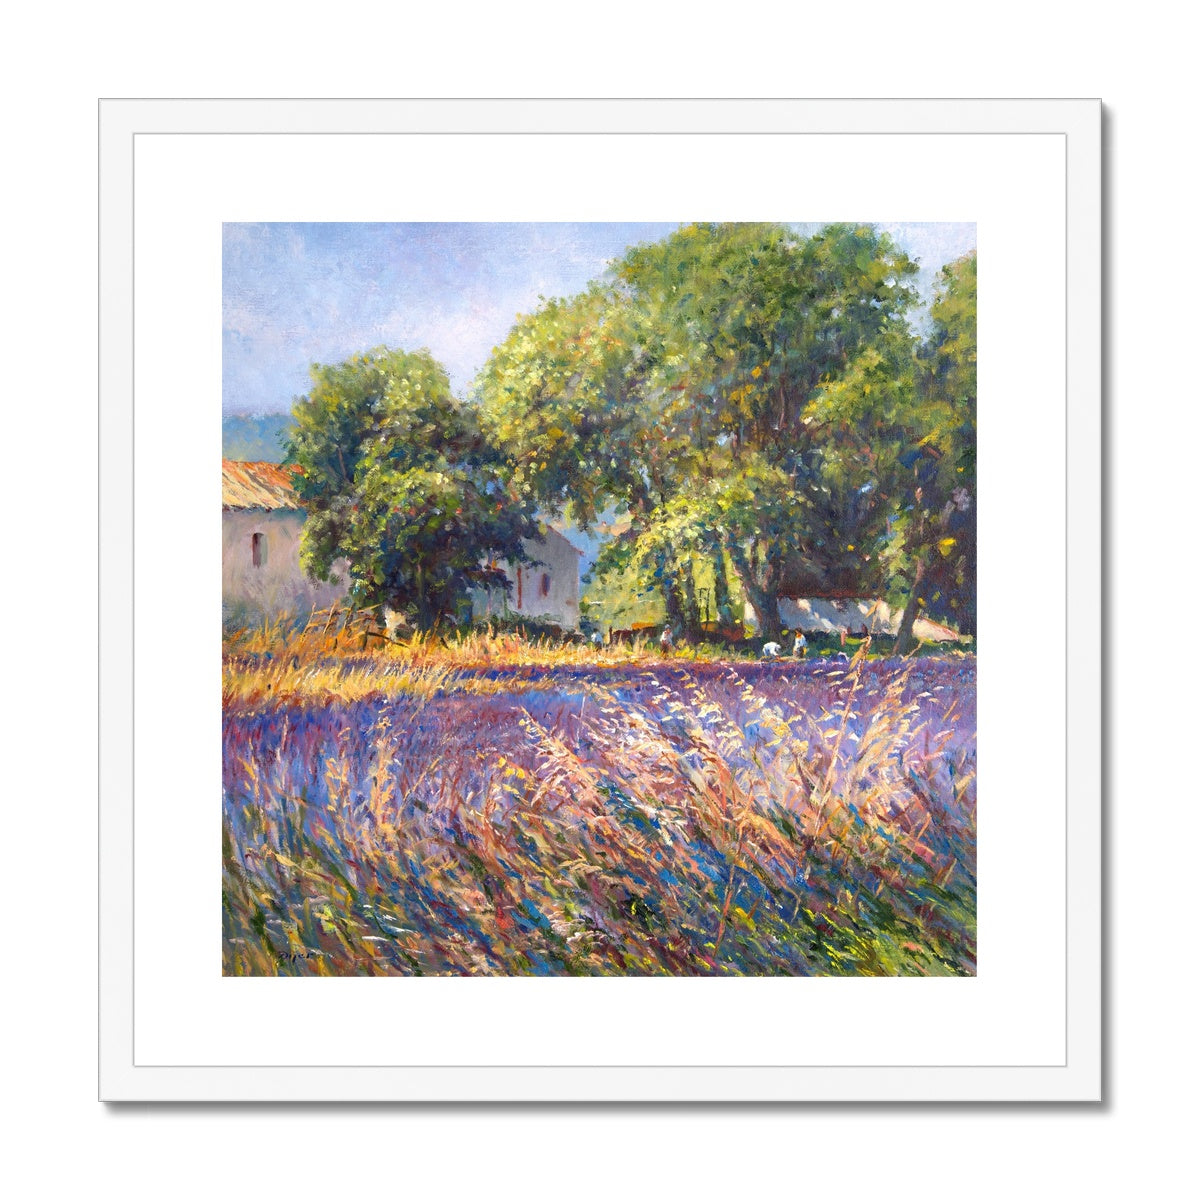 Ted Dyer Framed Open Edition Cornish Fine Art Print. 'Lavender Time, Provence'. Cornwall Art Gallery